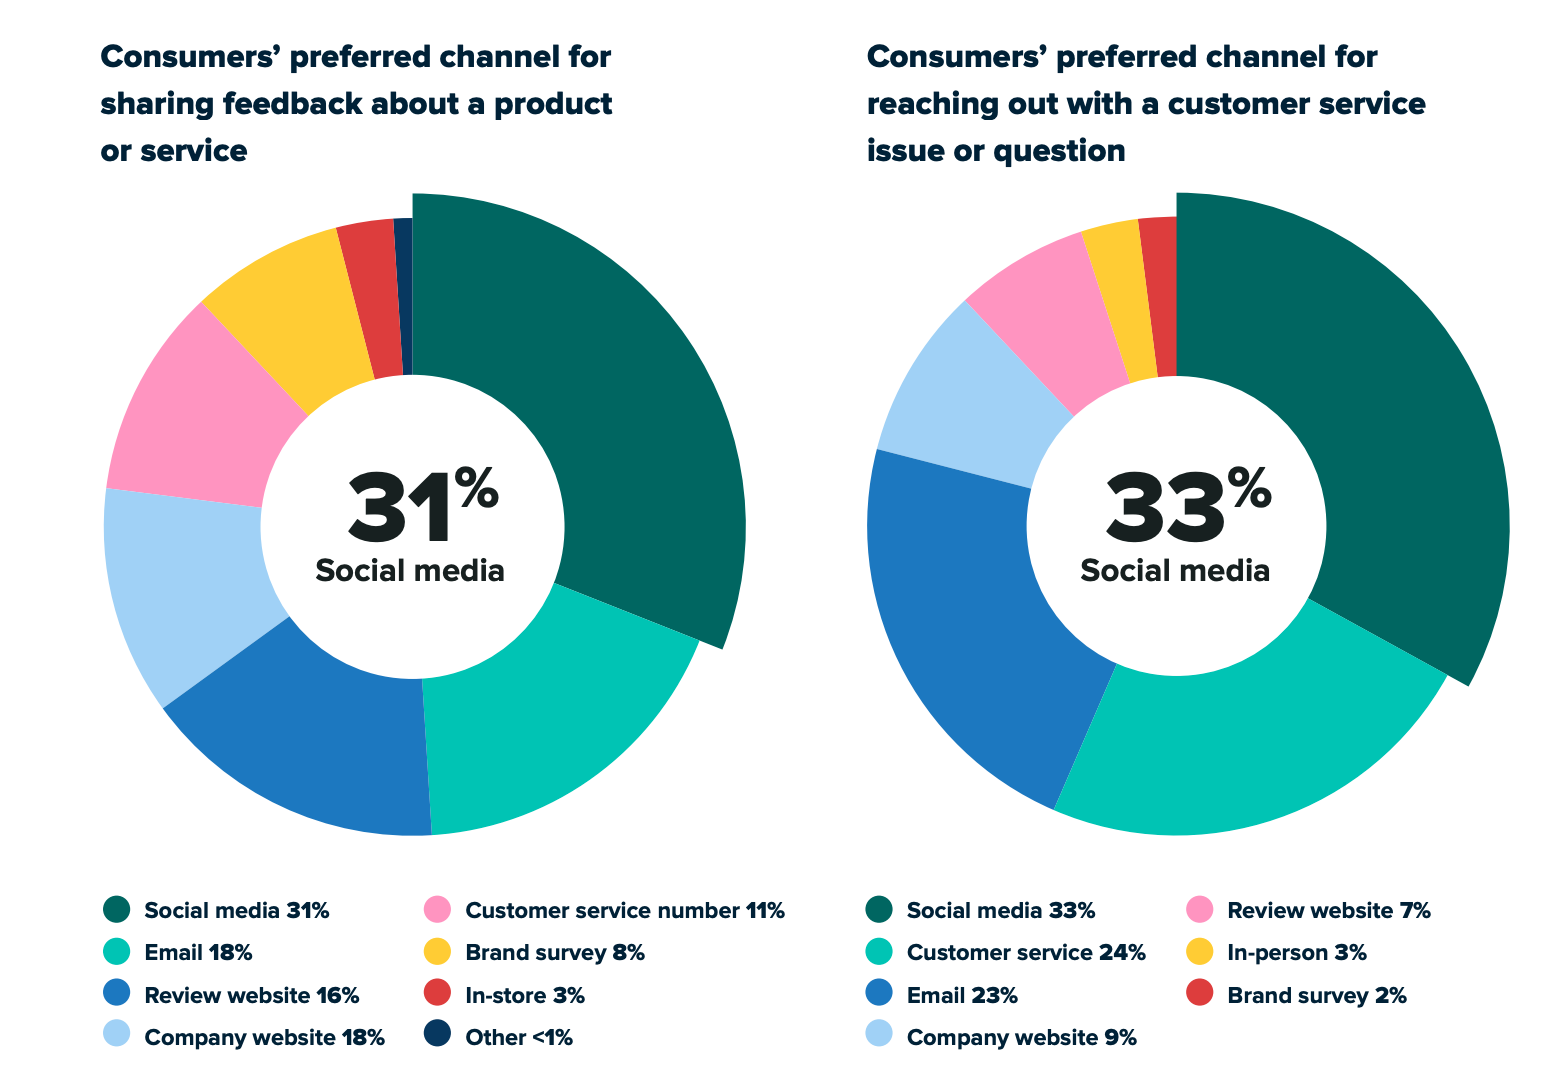 Consumers preferred channel for sharing feedback 